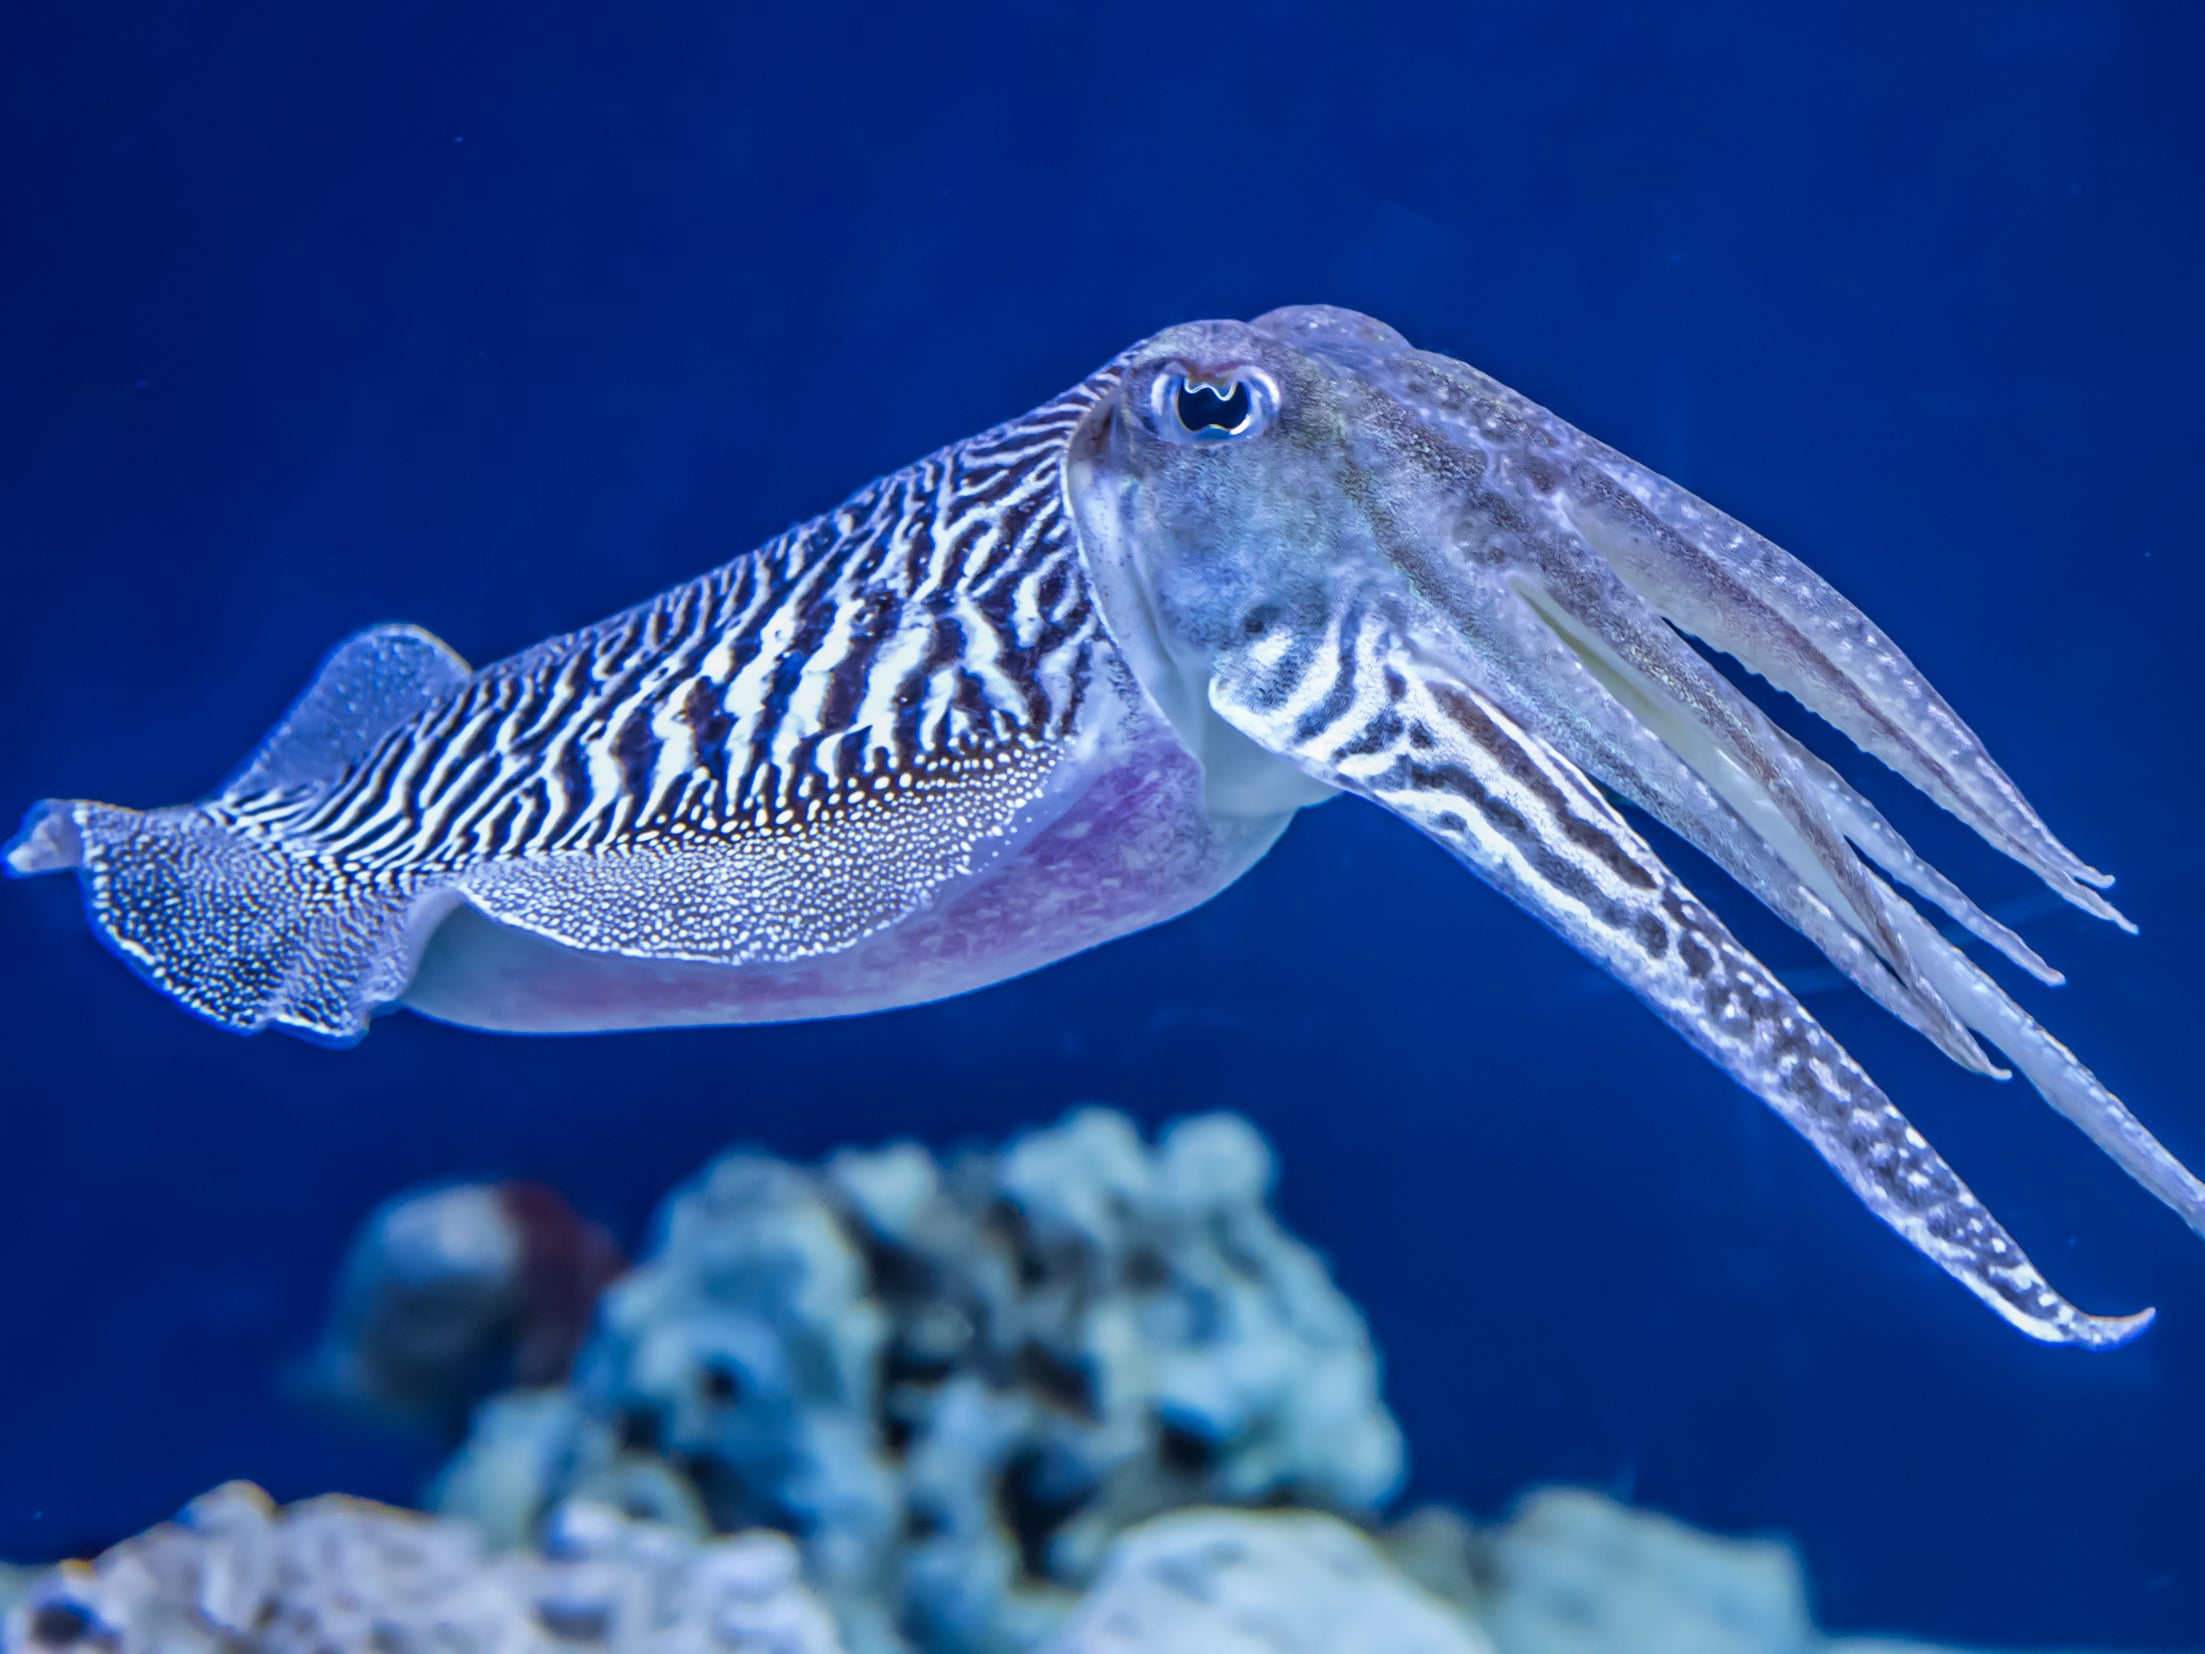 Cuttlefish eat less for lunch if their favourite food is on the menu later, research finds